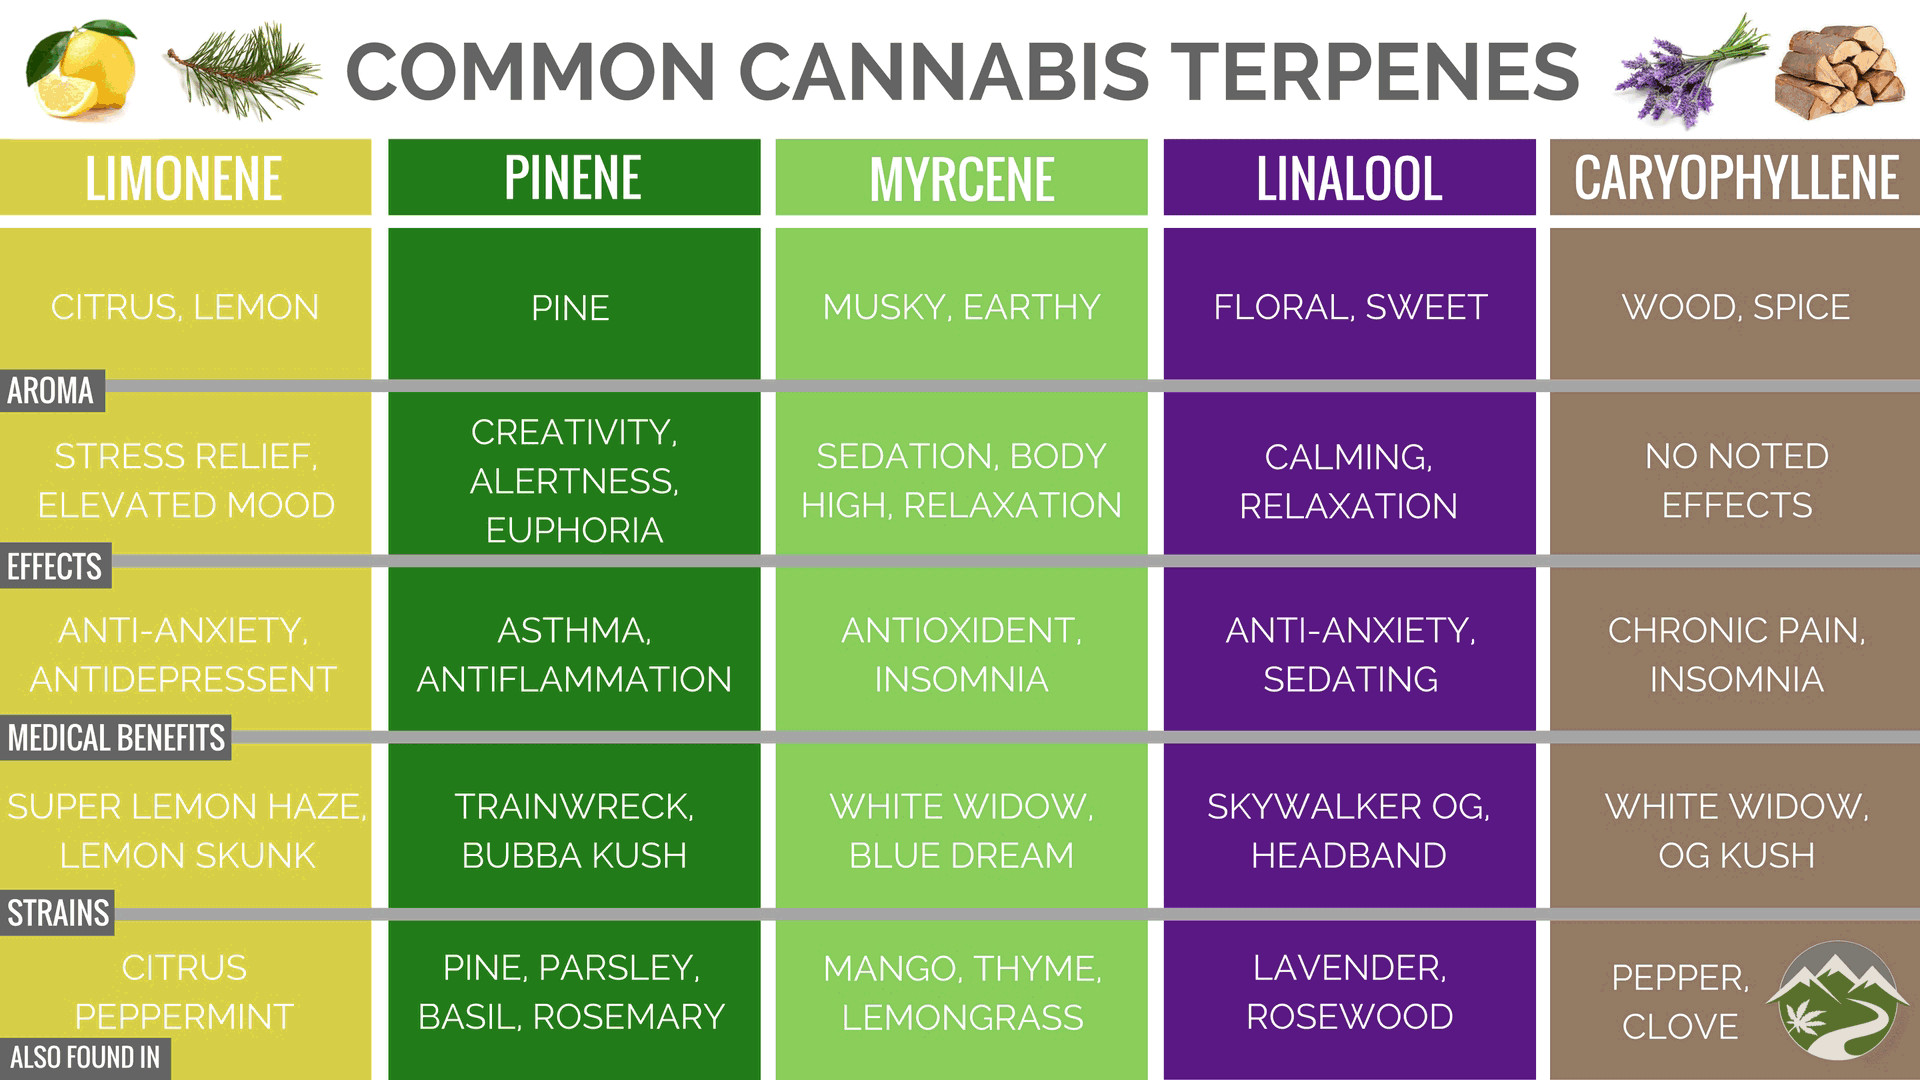 The above infographic illustrates the types of common cannabis terpenes.